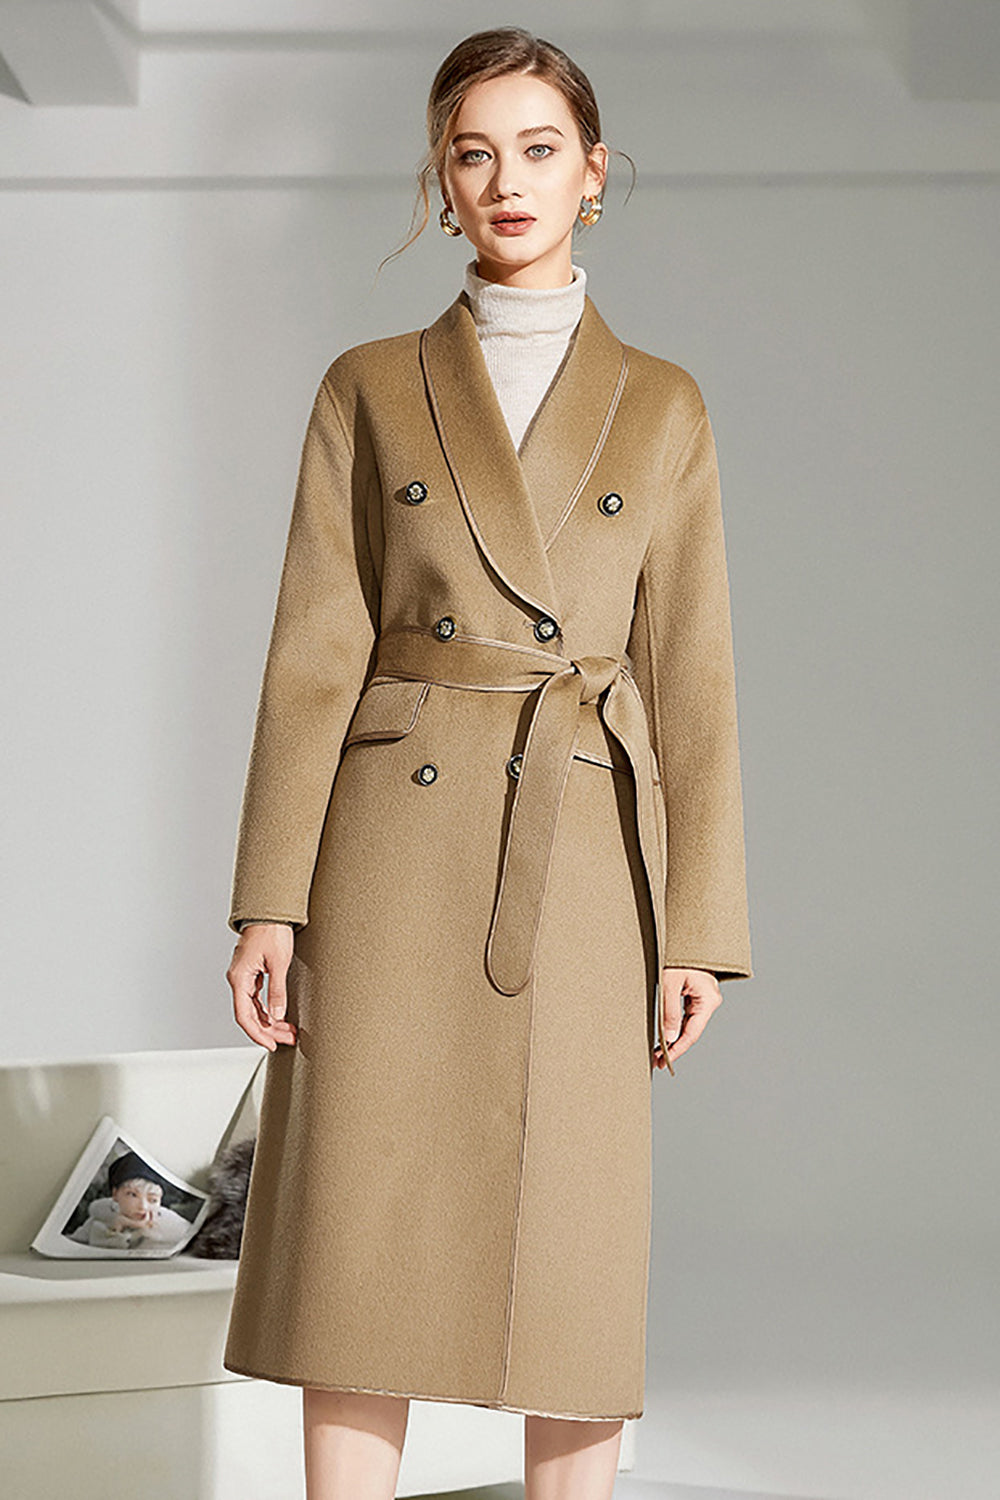 Black Double Breasted Lapel Neck Long Wool Coat with Belt